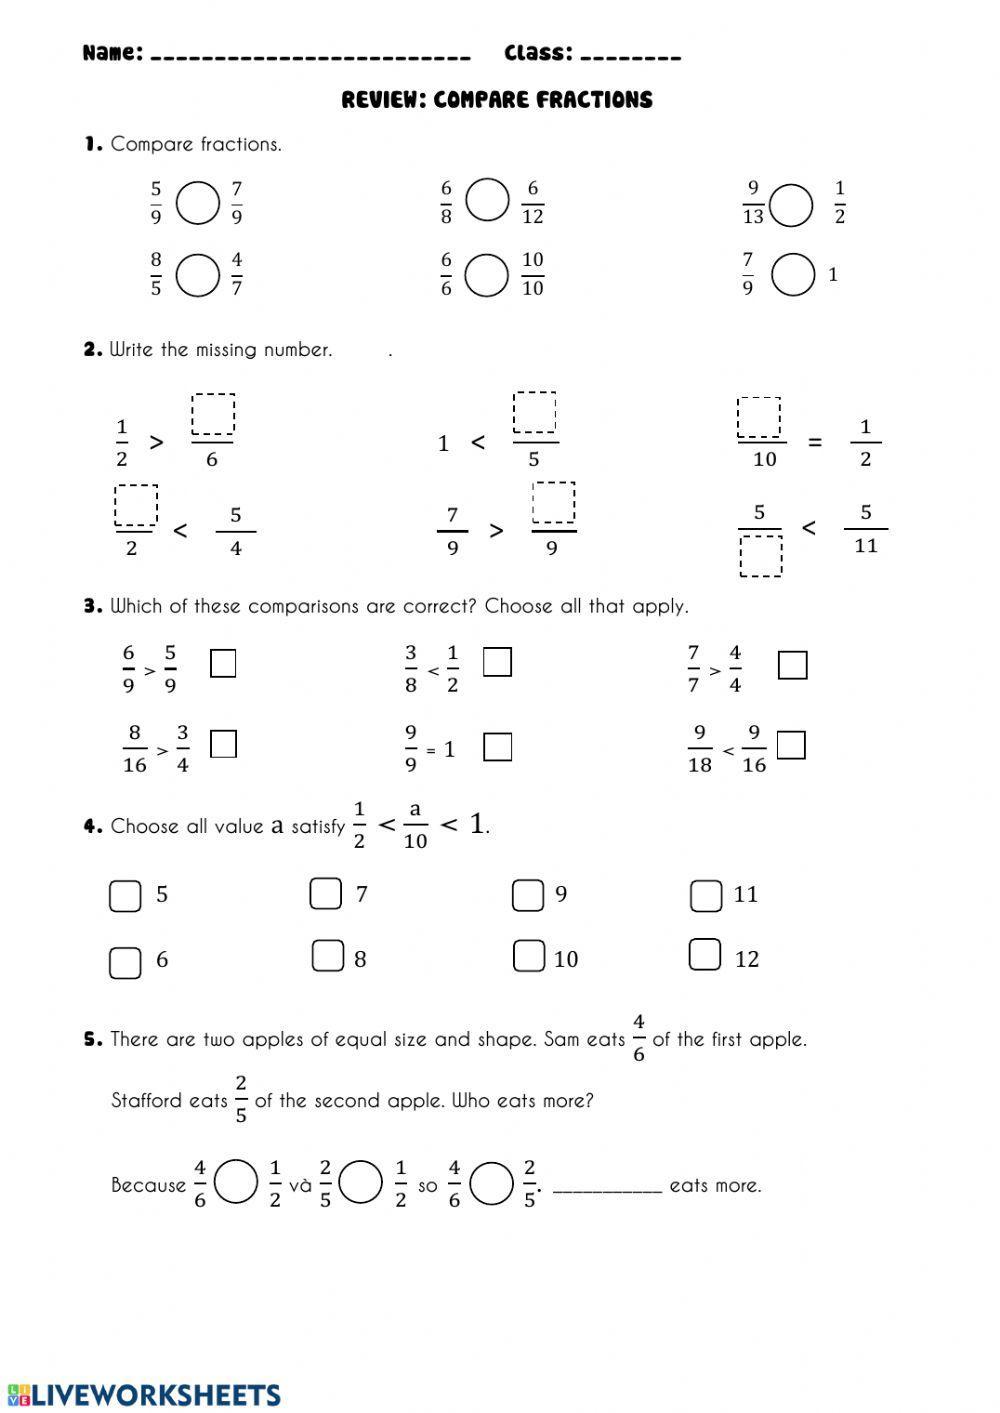 Review: Compare fractions (Practice)